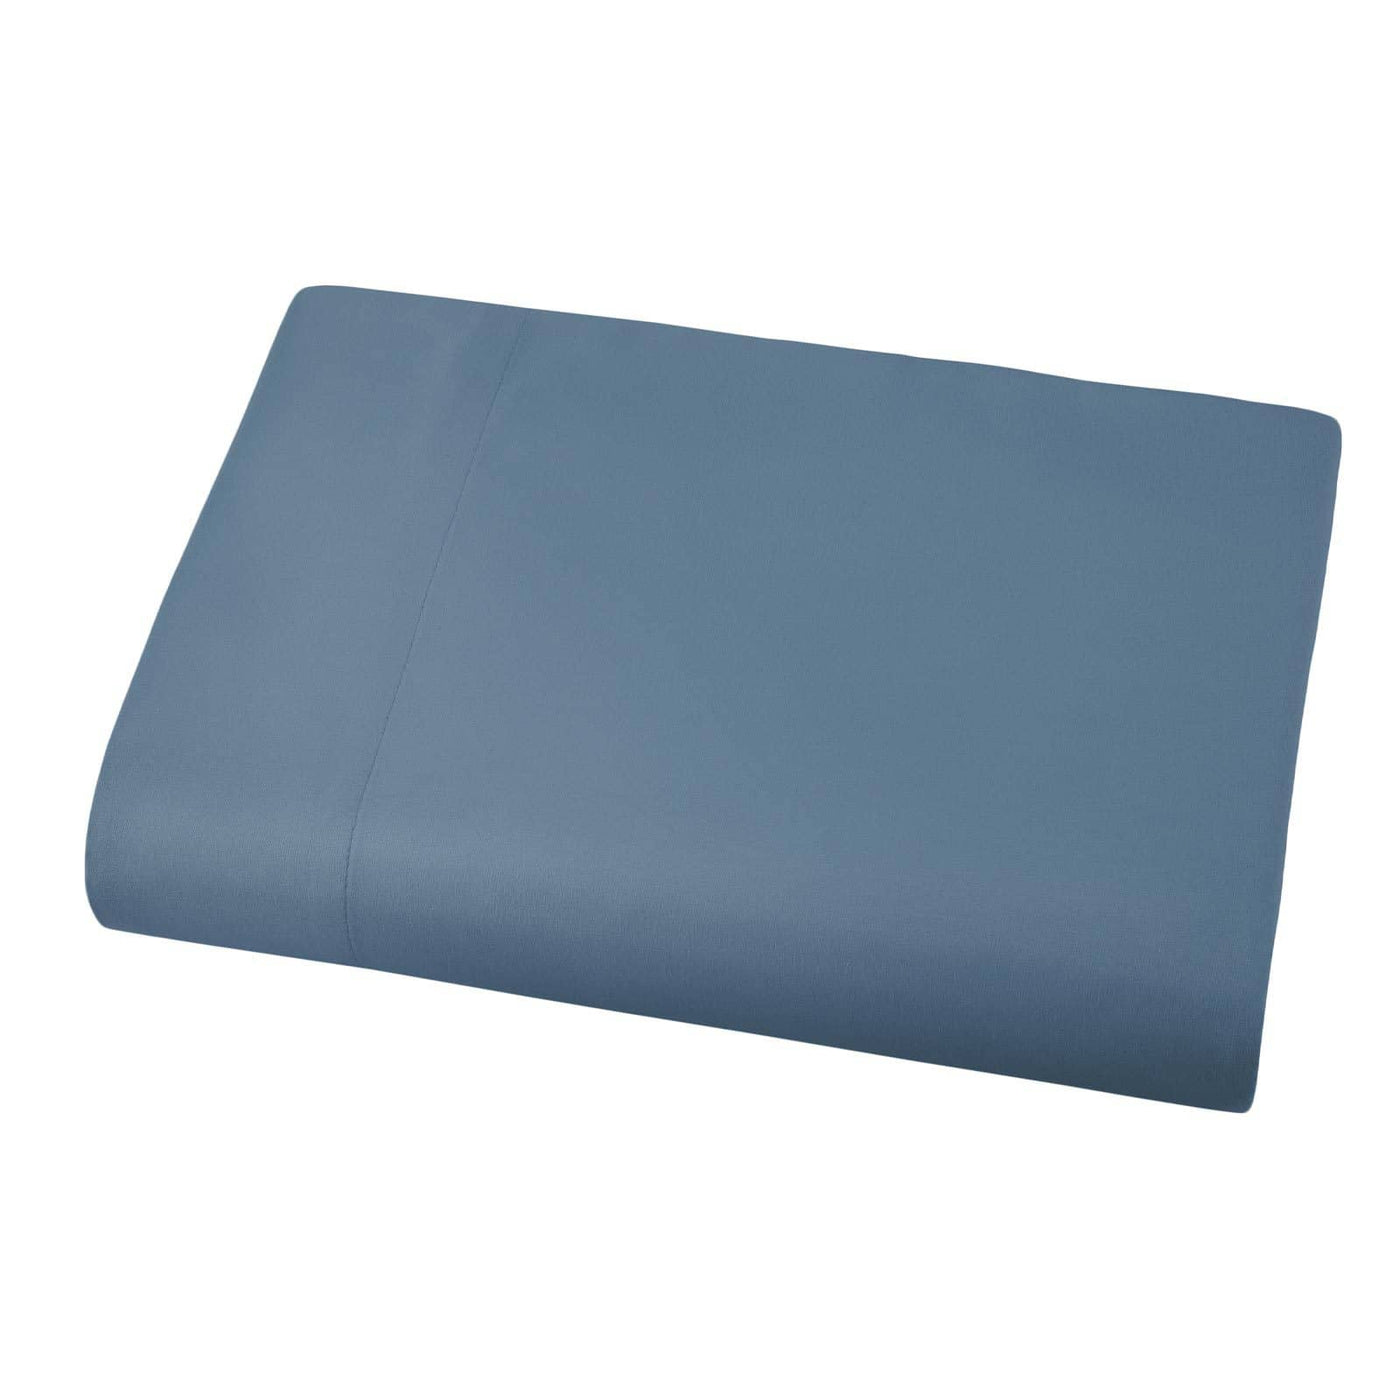 Soft and Luxurious Over-sized Flat Sheet 132 in x 110 in by Vilano springs in Coronet Blue#color_vilano-coronet-blue